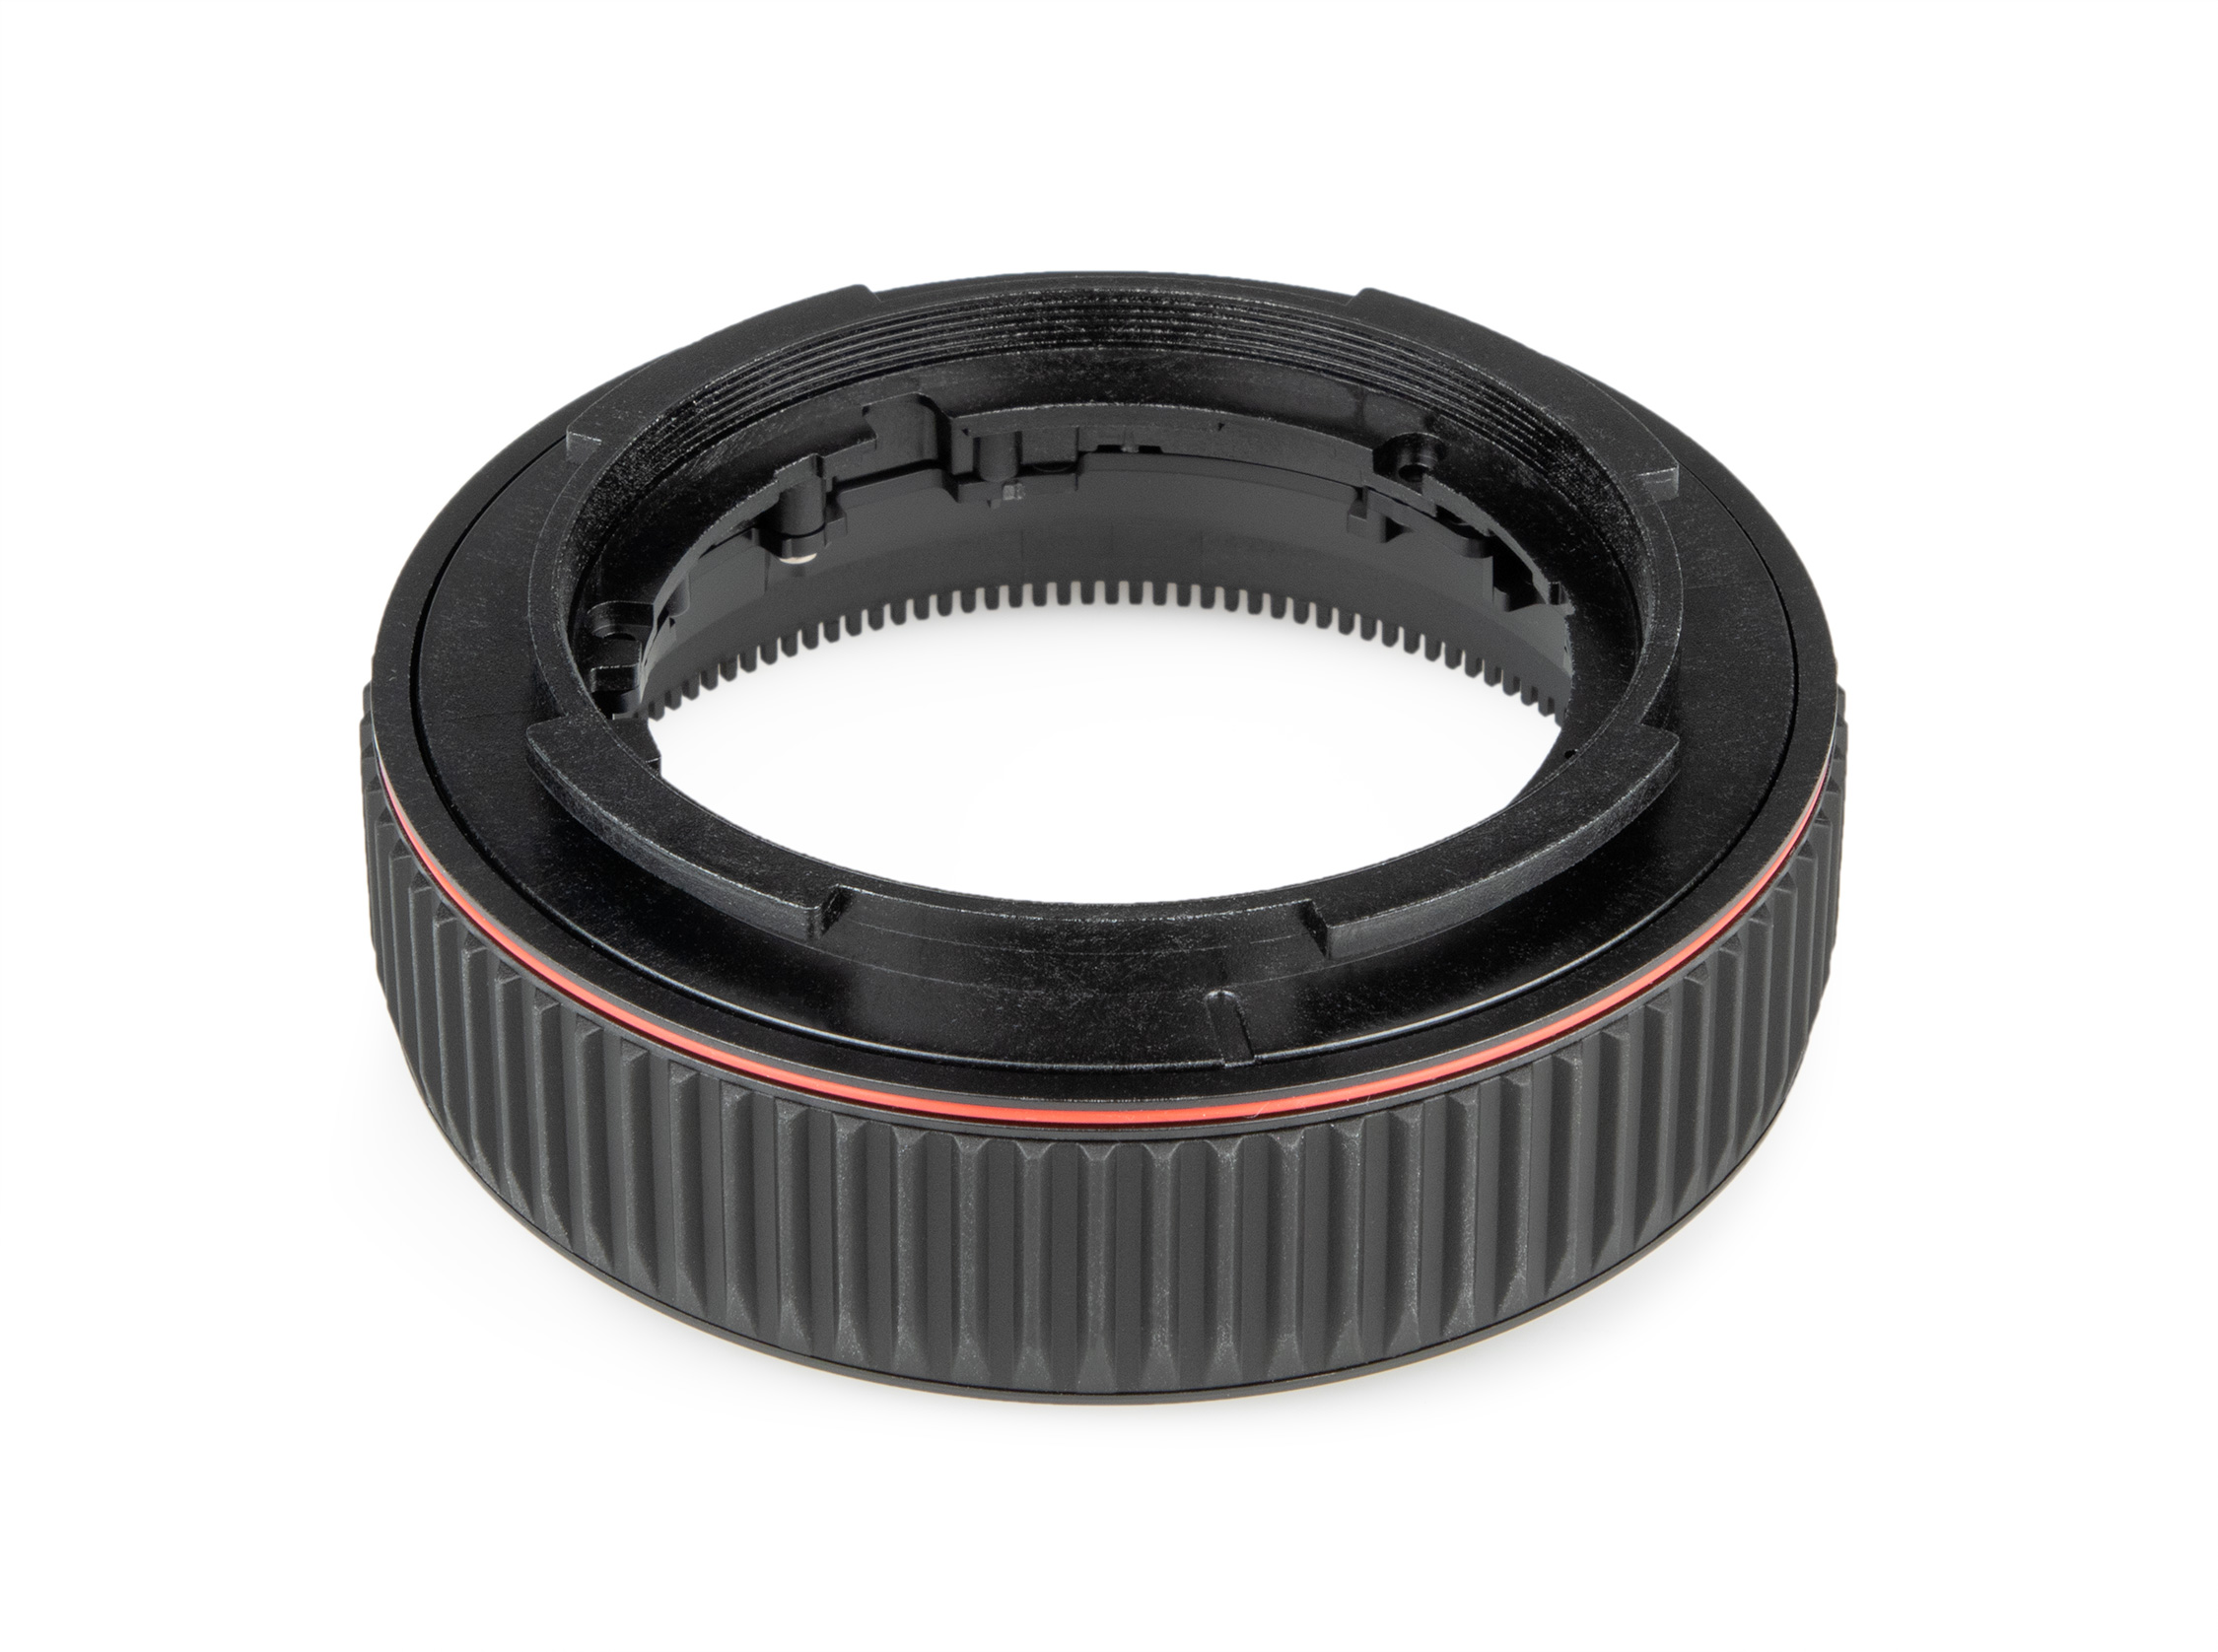 Movo FR3 Adjustable Follow Focus Ring Set of 3 with 65mm, 75mm and 85mm Lens  Gear Rings (Standard 32 Pitch - 0.8 mod)